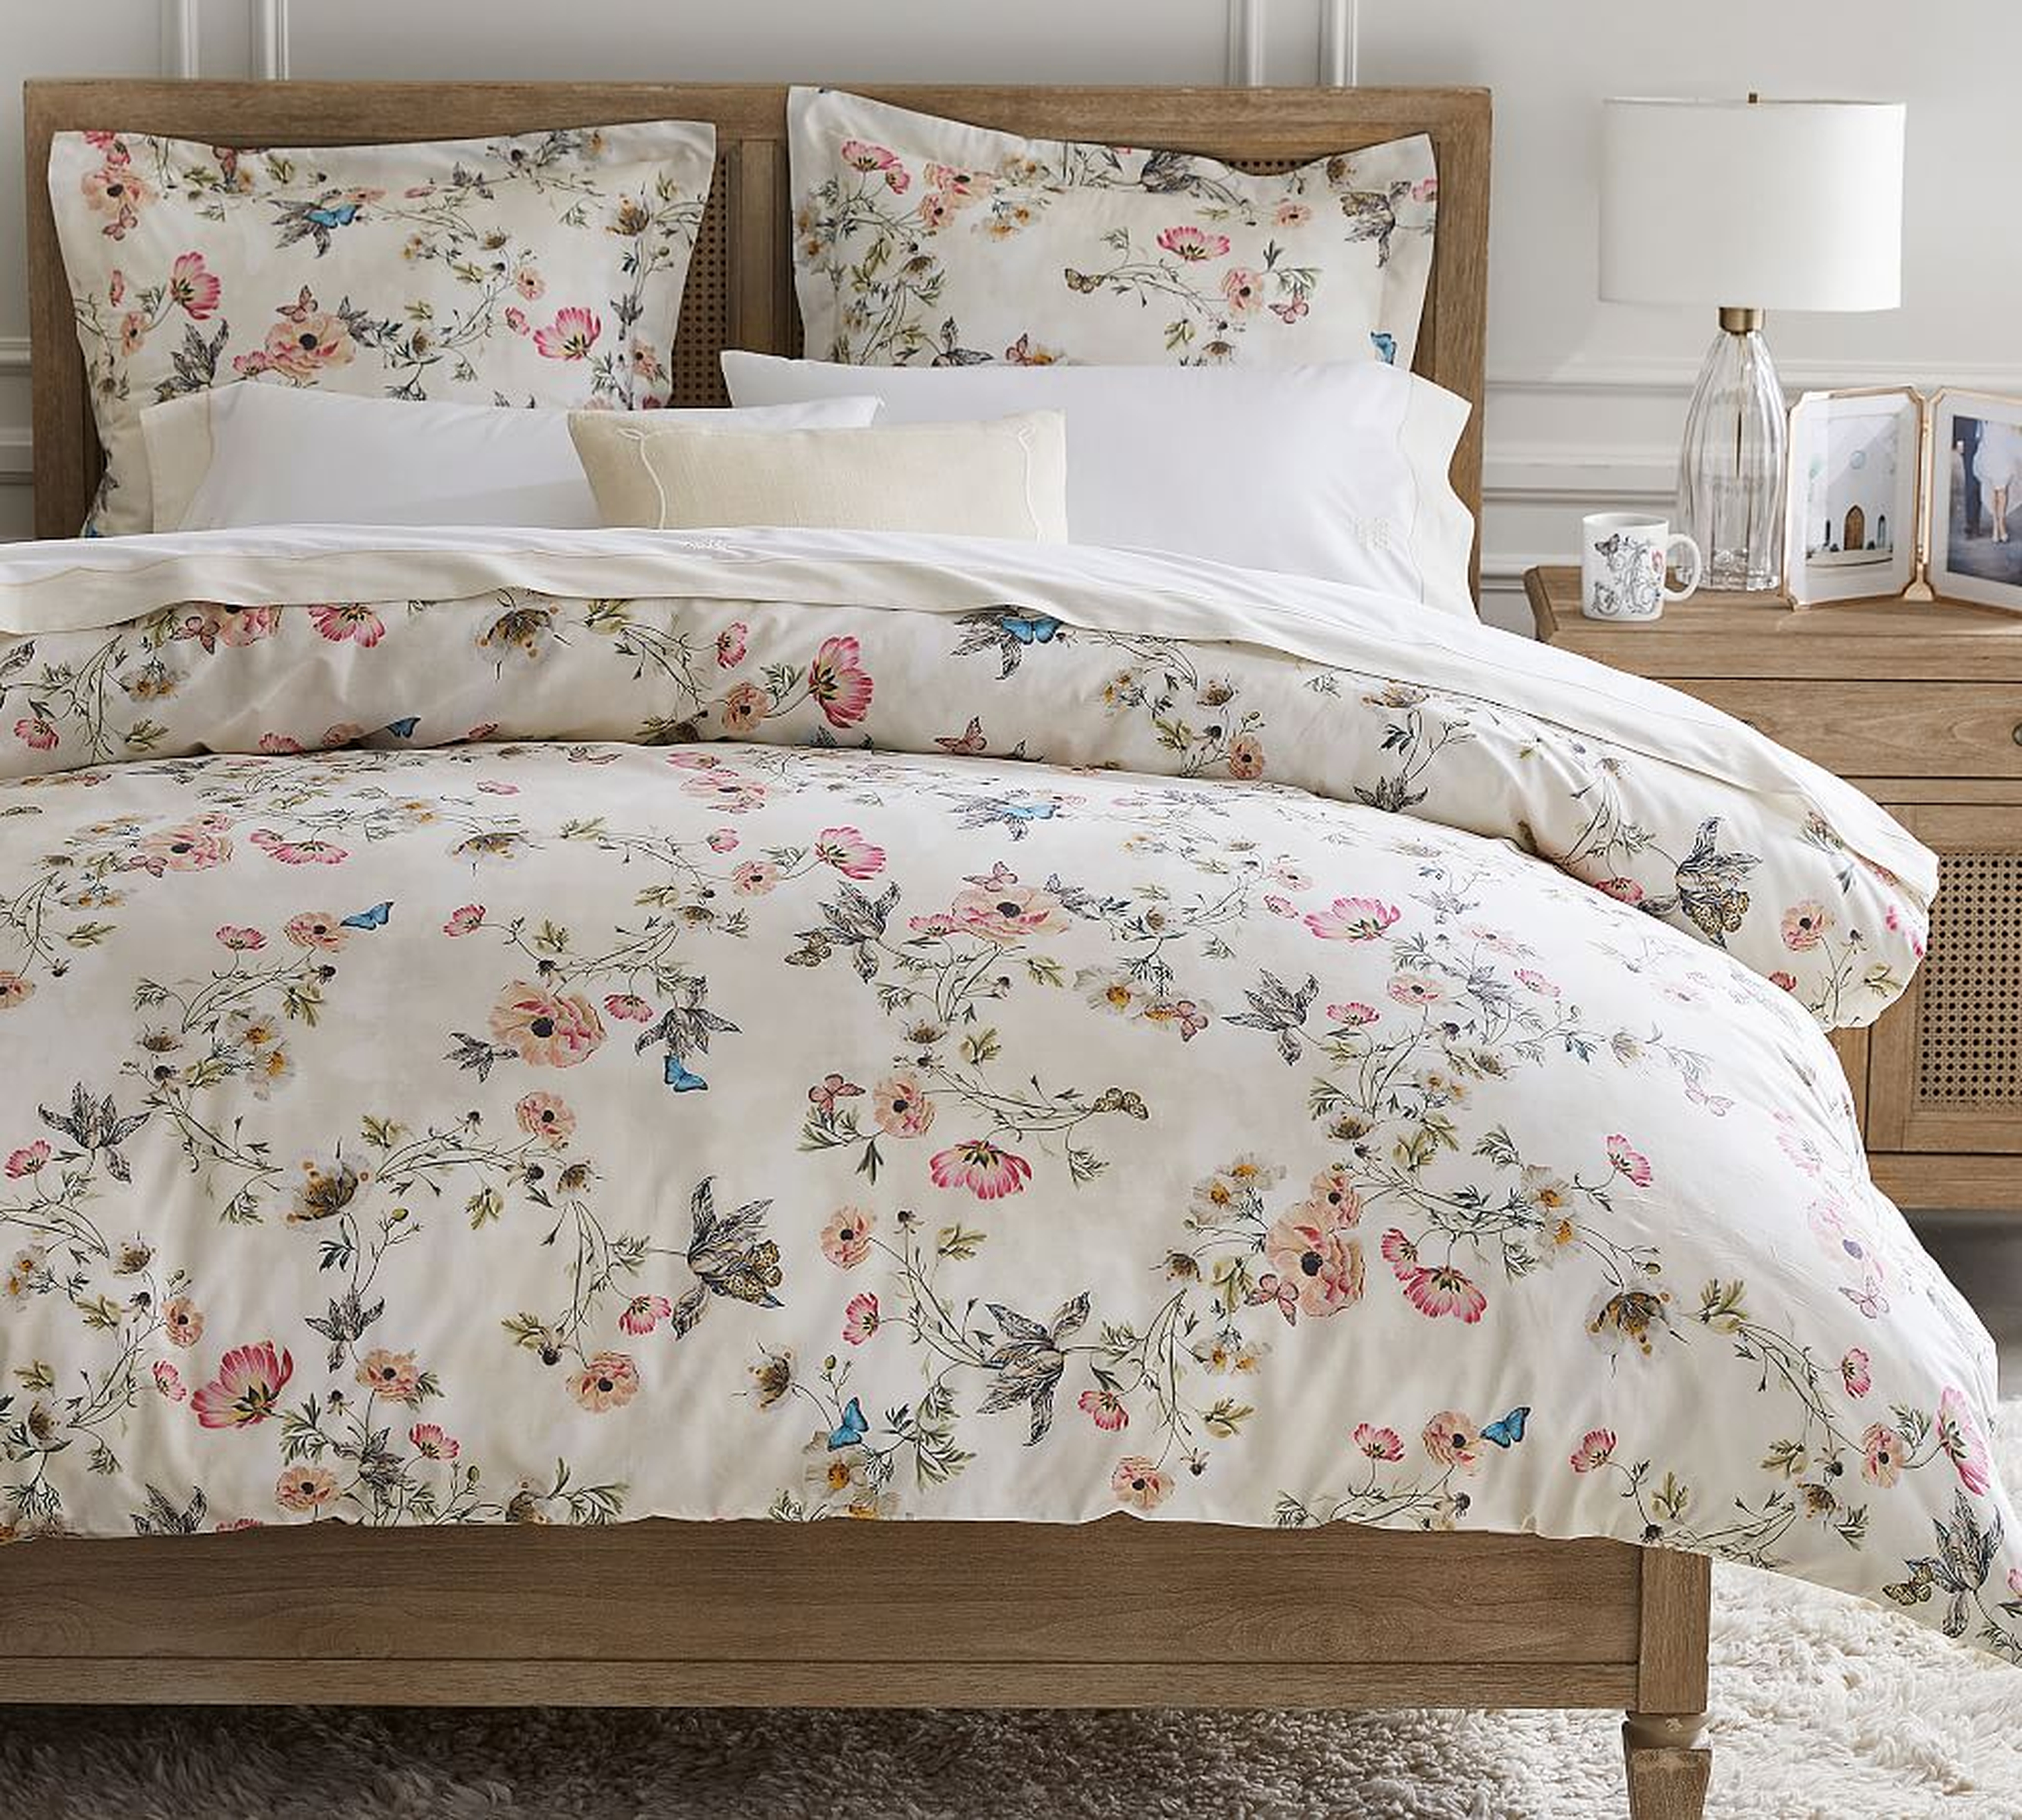 Monique Lhuillier Tuileries Percale Duvet Cover, King/Cal. King - Pottery Barn